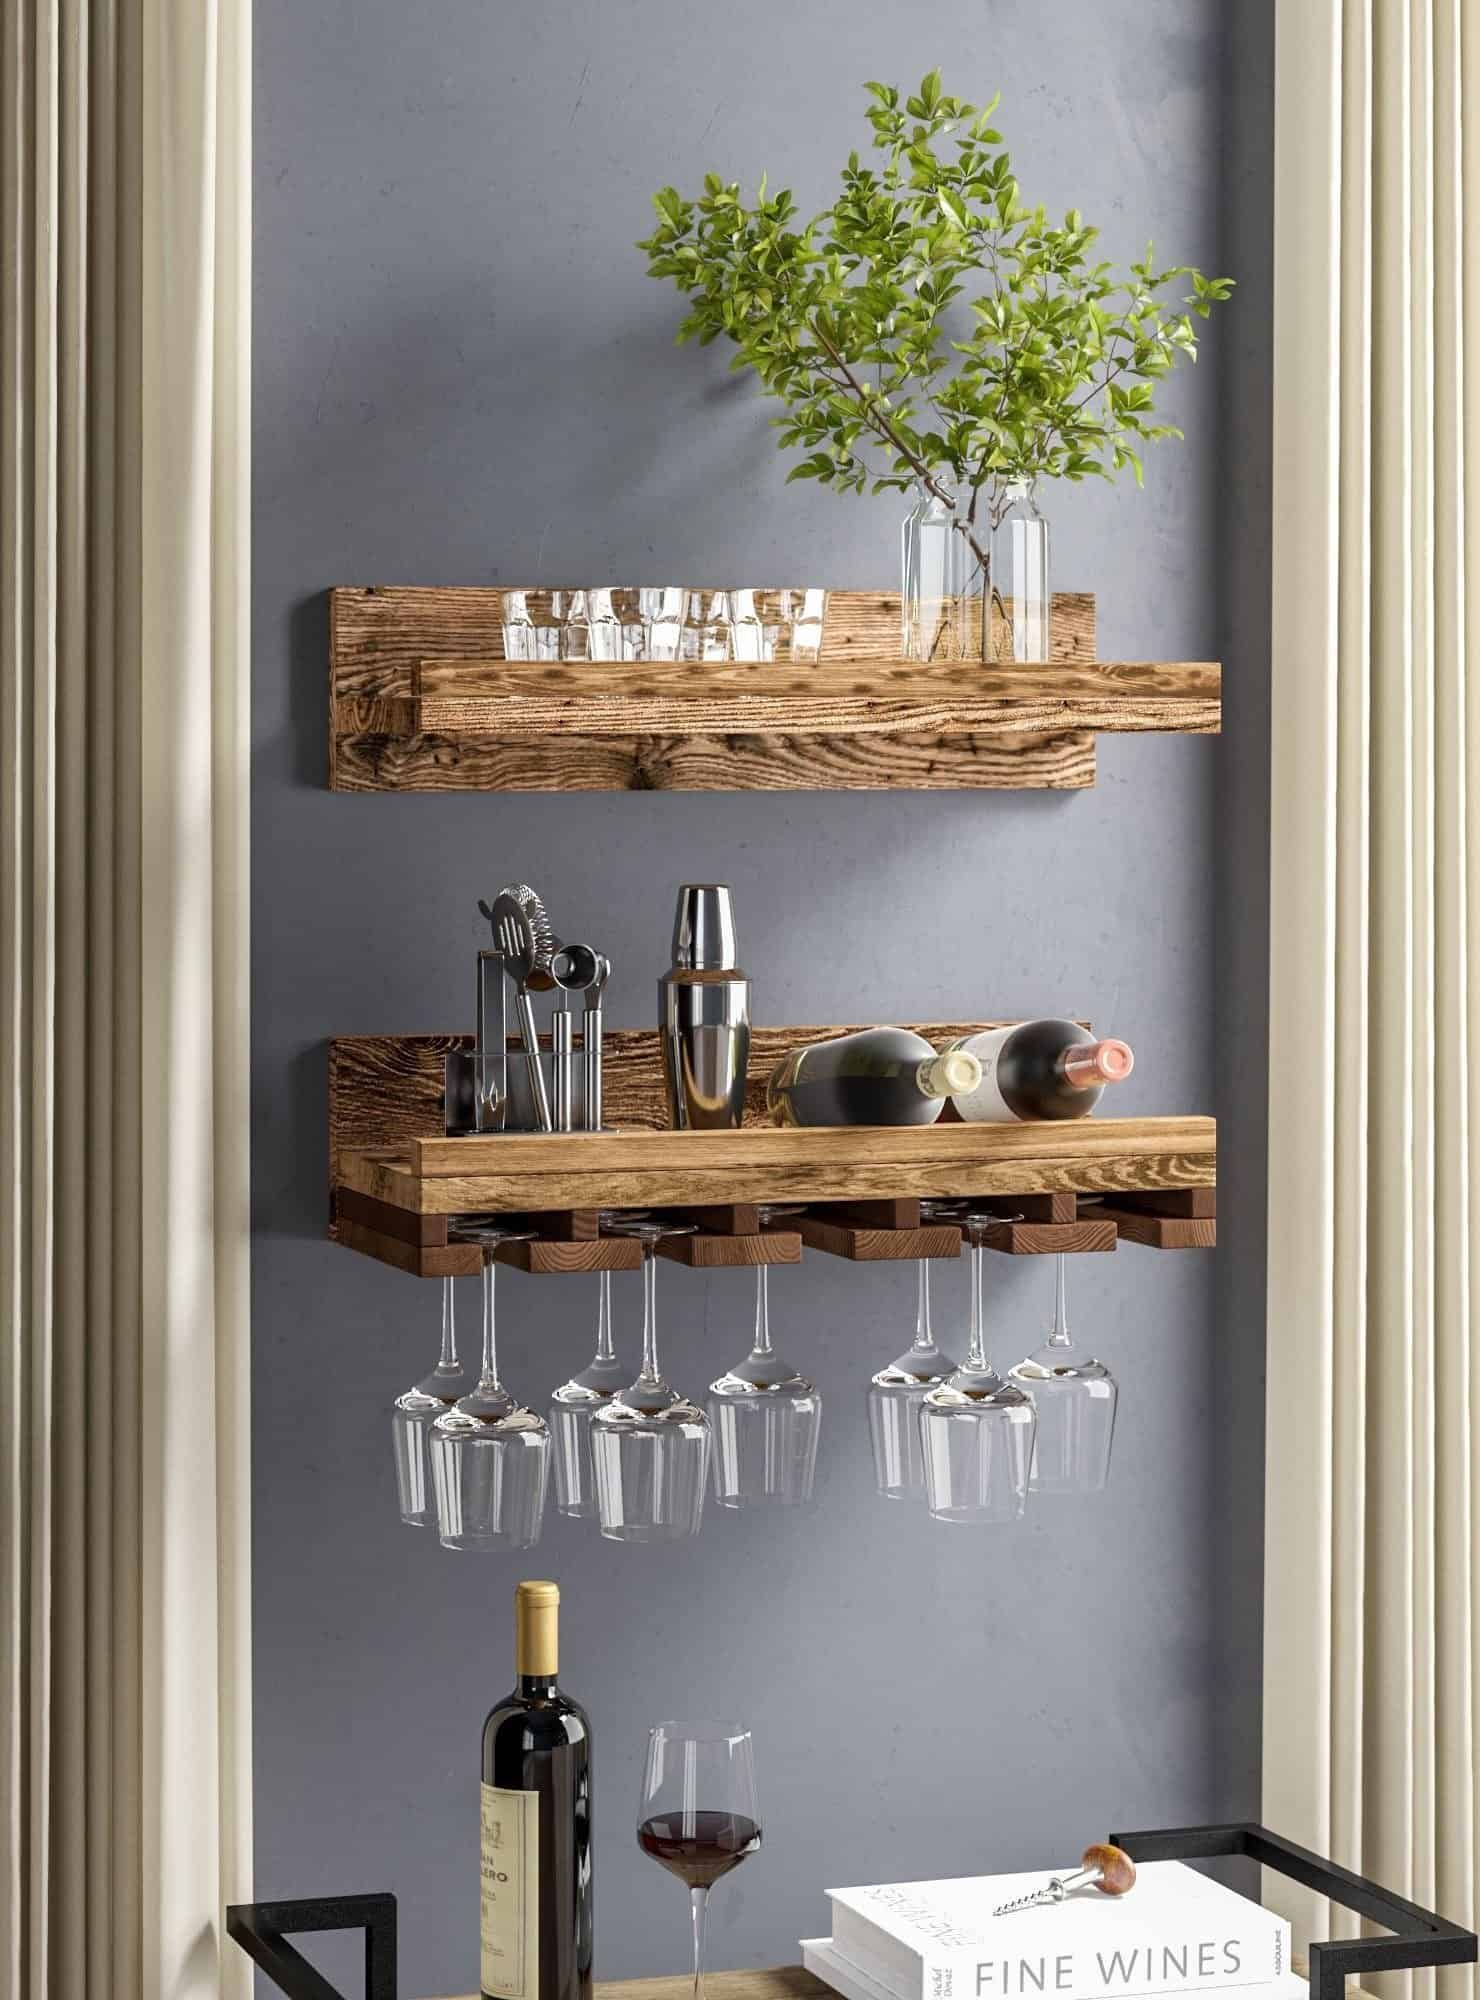 Best Kitchen Shelves With The Wine Rack